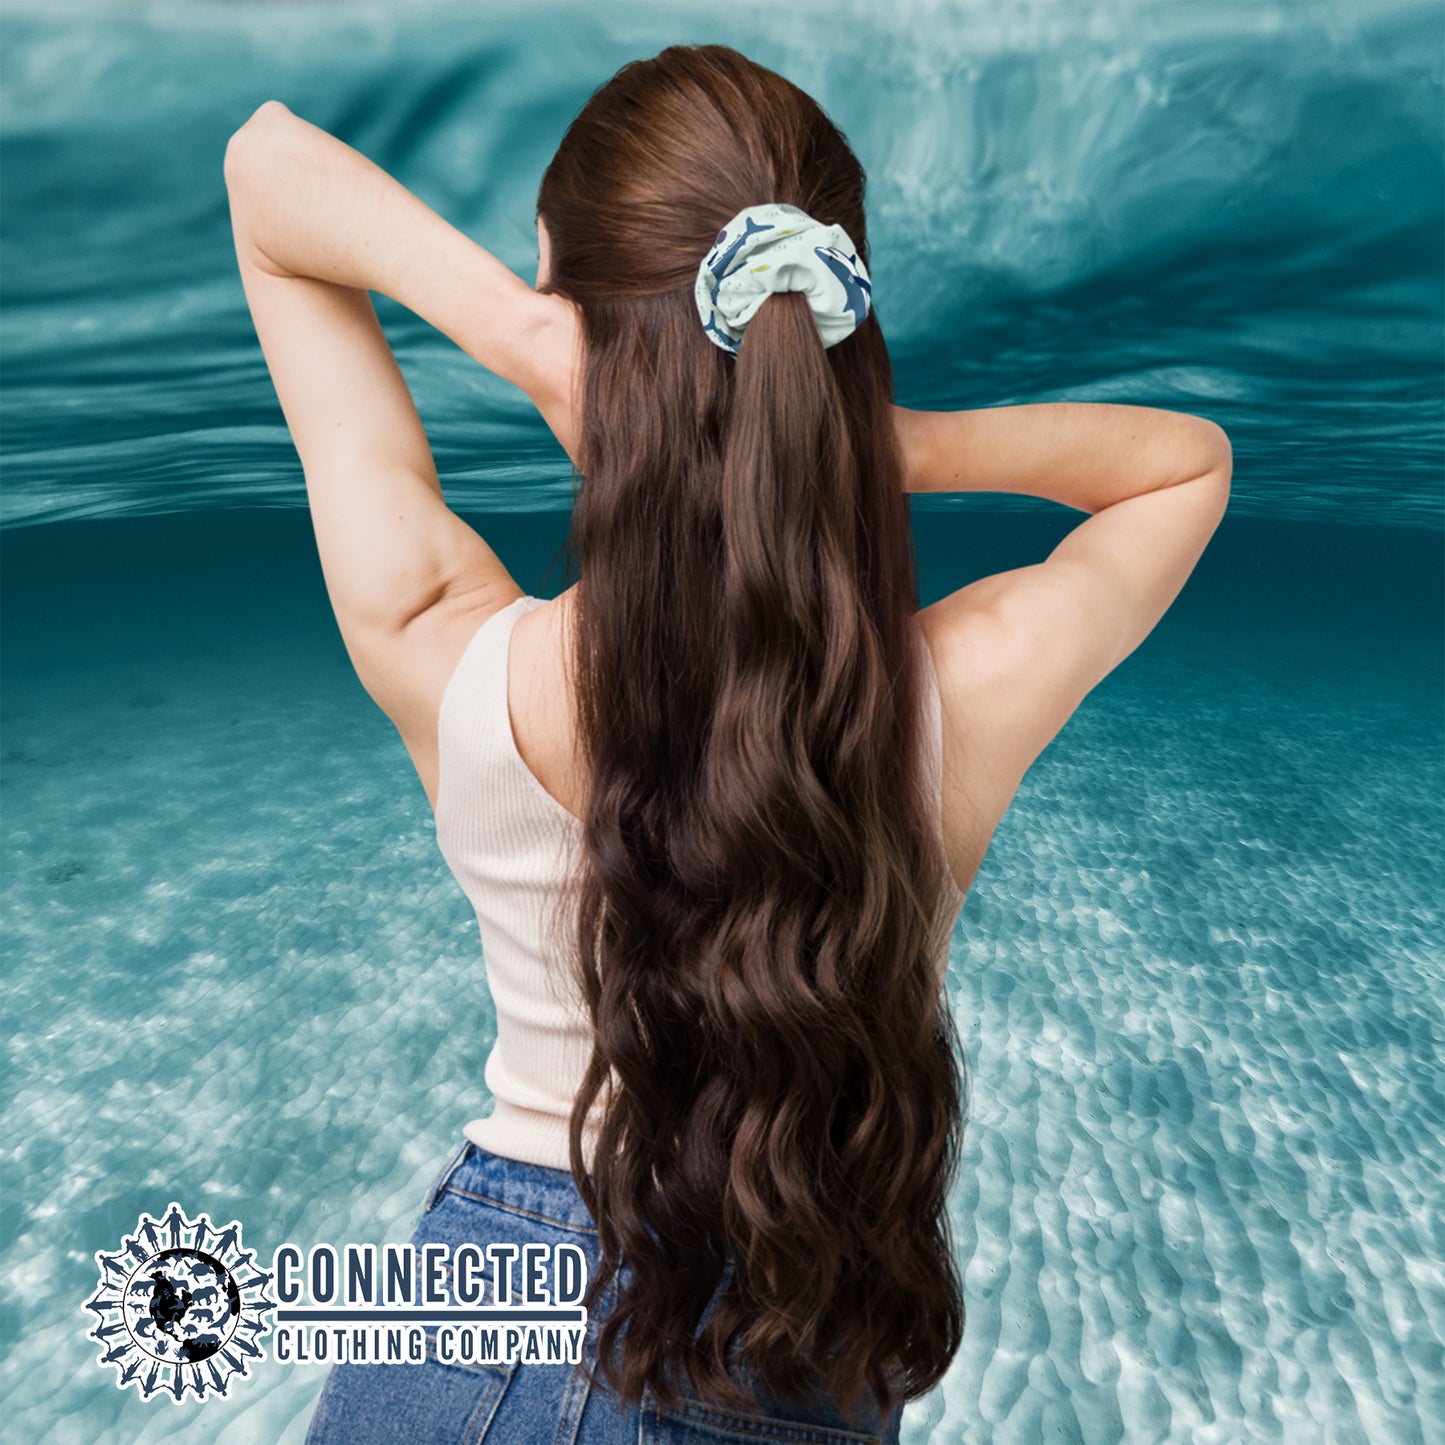 Model Wearing Shark Scrunchie in Light Color - Connected Clothing Company - Ethical & Sustainable Apparel - 10% donated to save the sharks